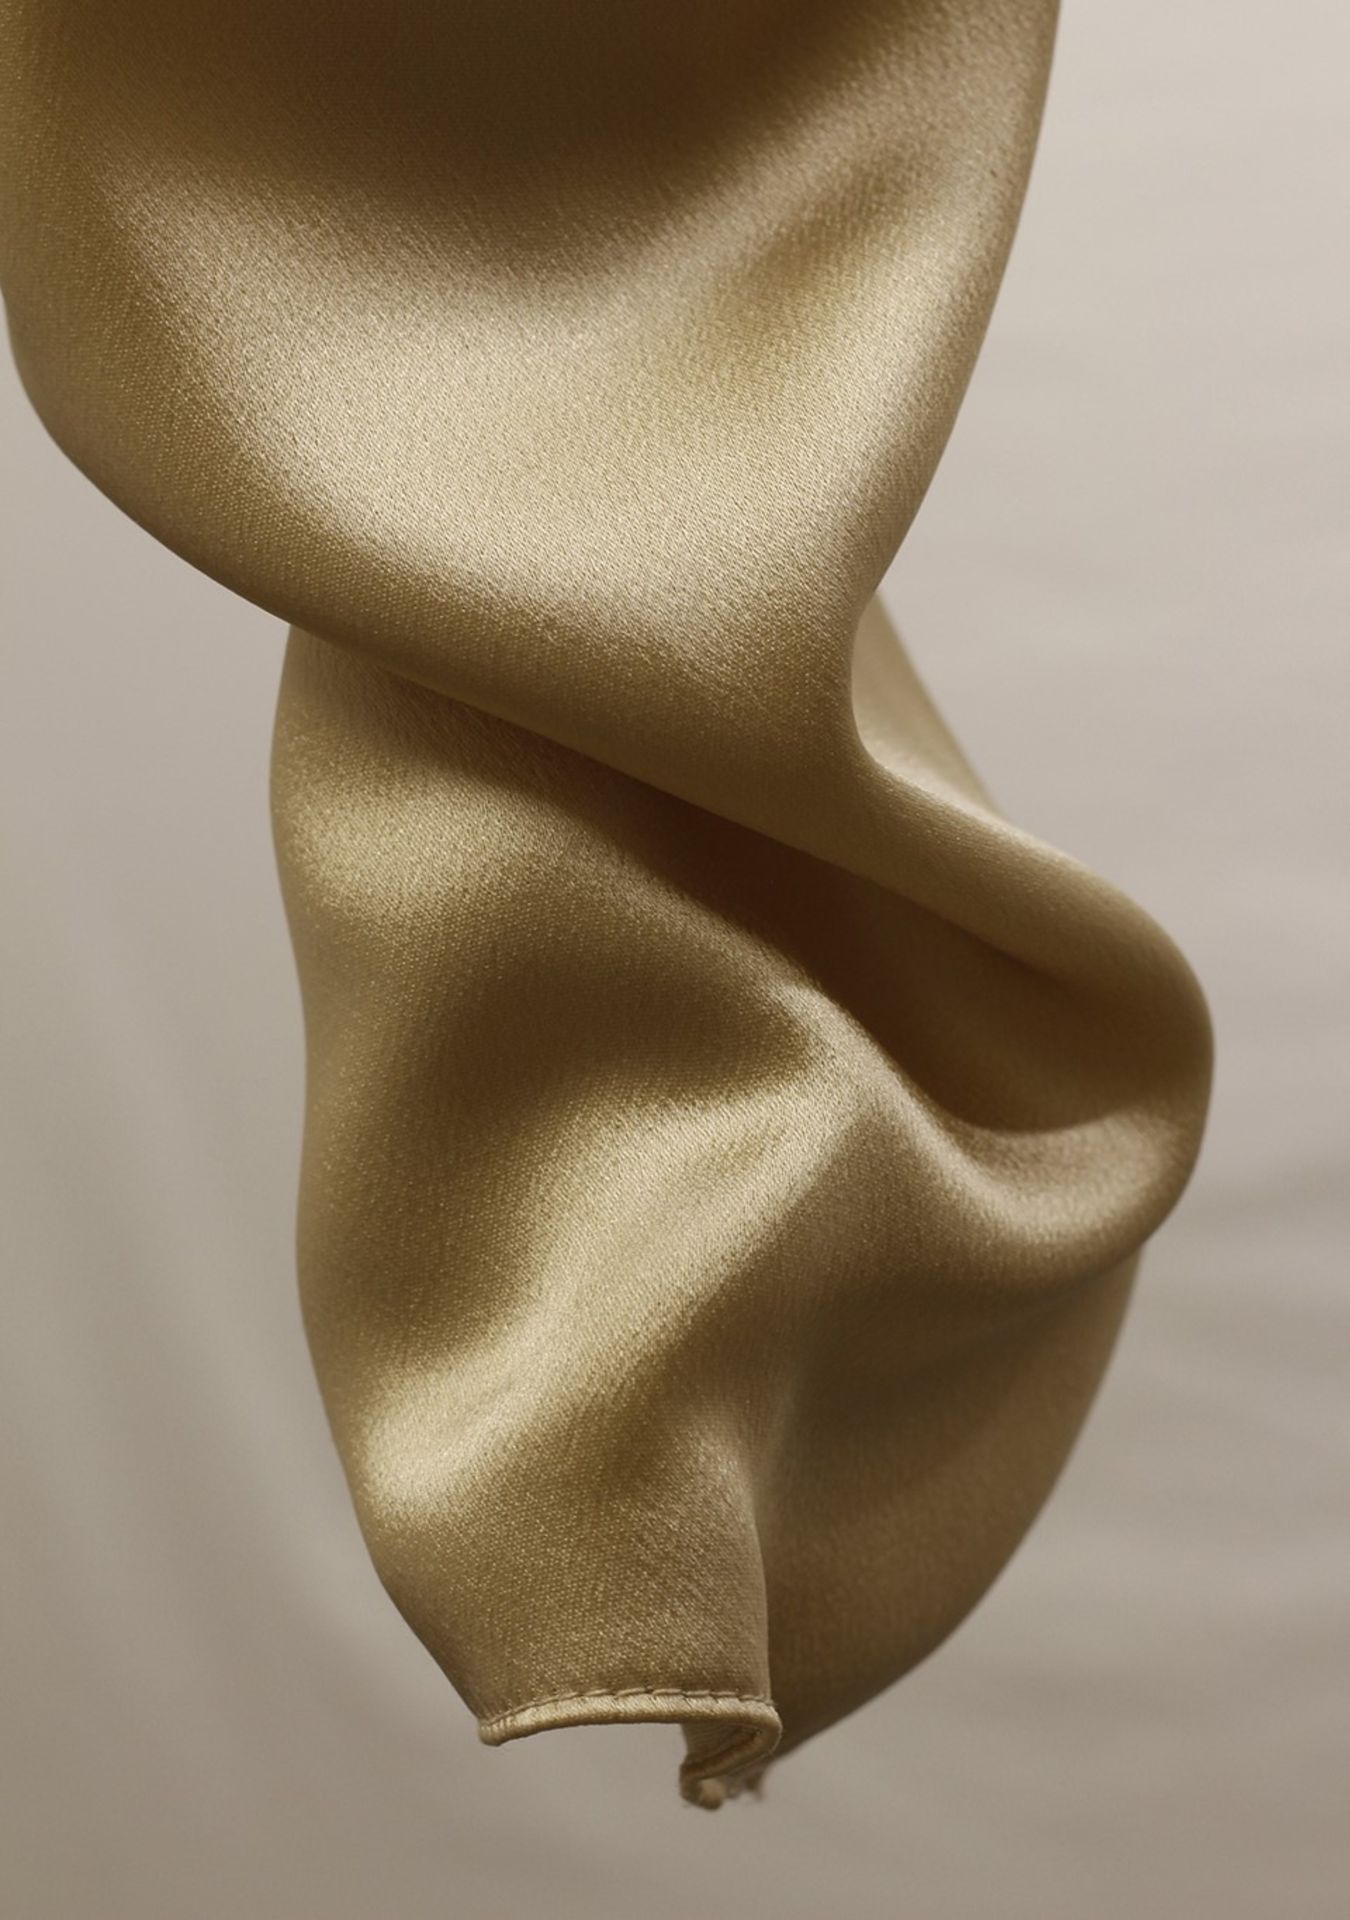 1 x Anne Belin Champagne Bolero - Size: 16 - Material: 50% Viscose, 50% Acetate - From a High End - Image 3 of 6